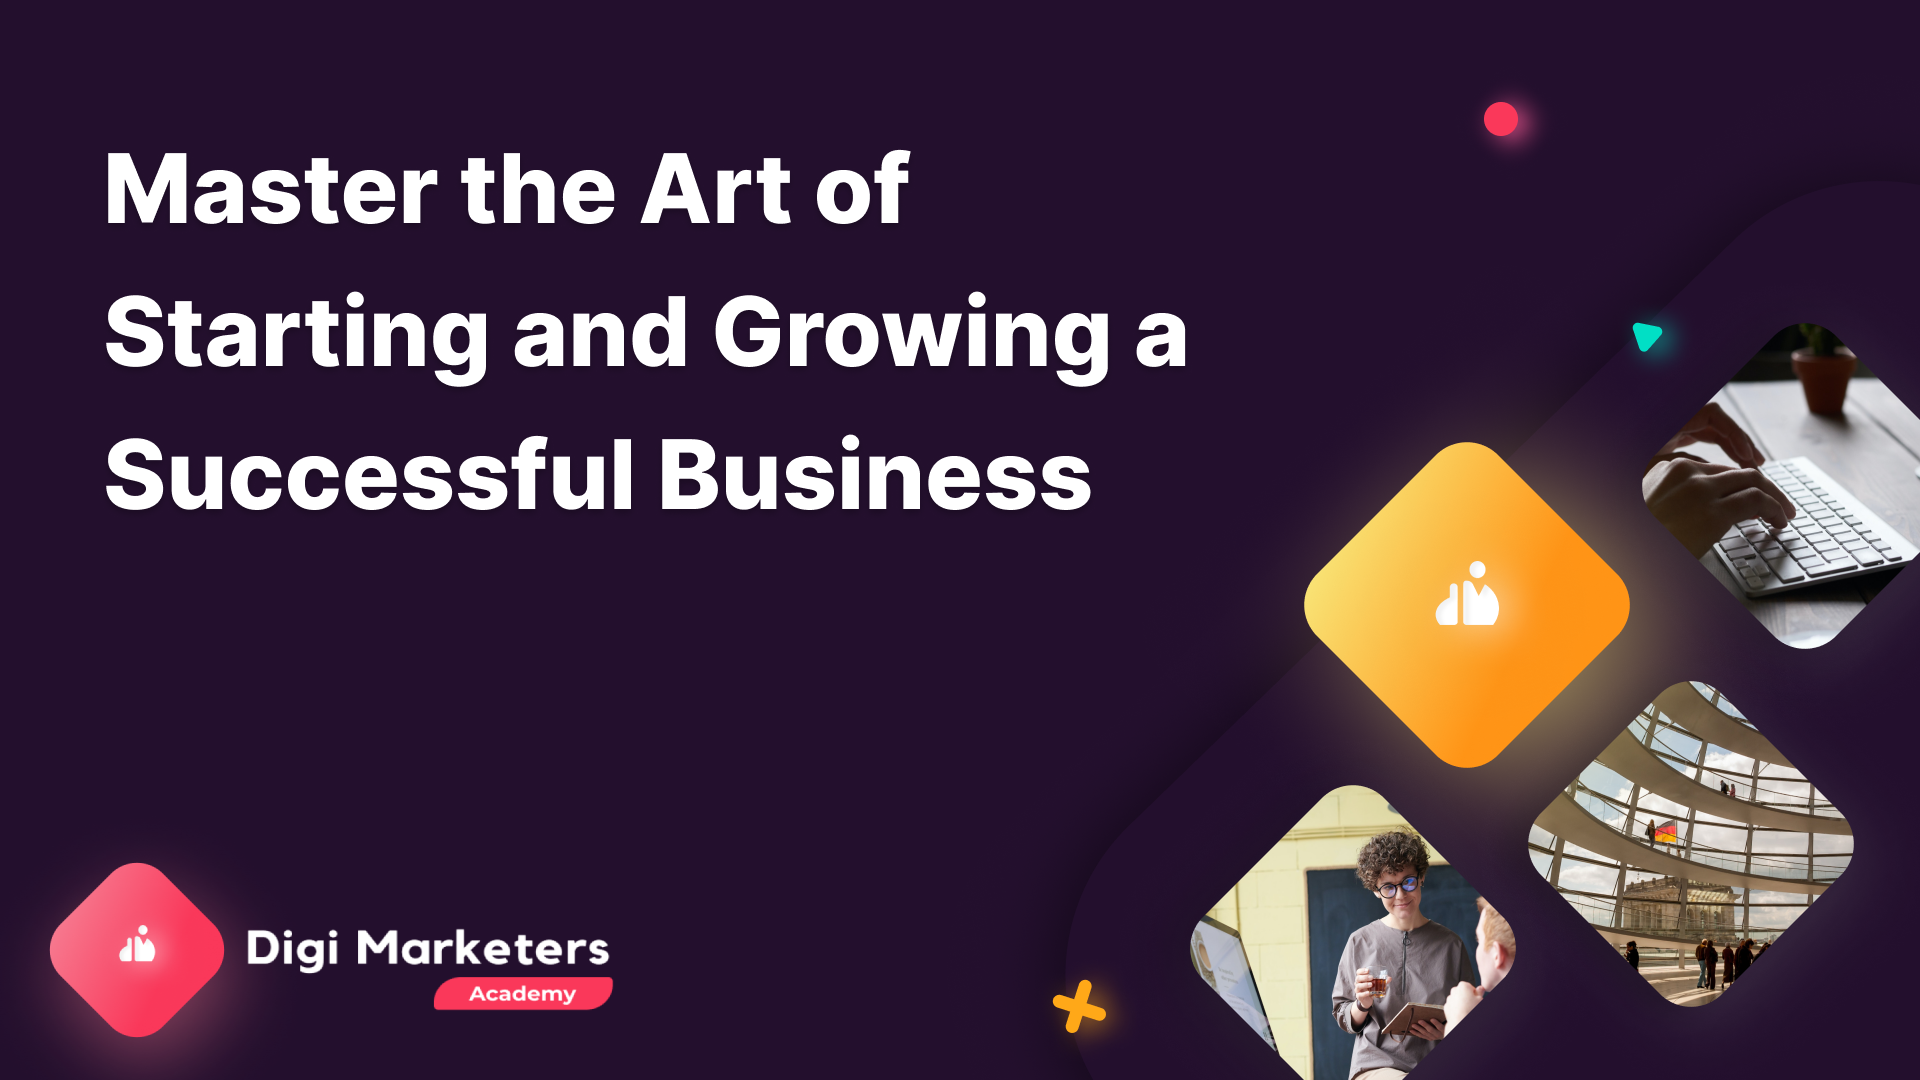 Master the Art of Starting and Growing a Successful Business, Online Event